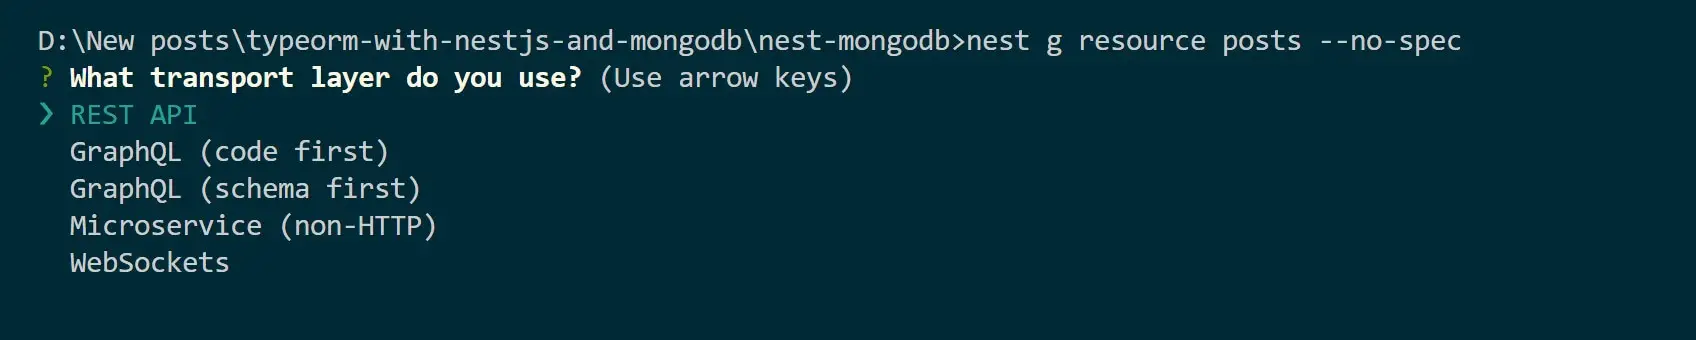 This Example guide teaches you how to build Nest.js app while using TypeORM to connect to your MongoDB database.